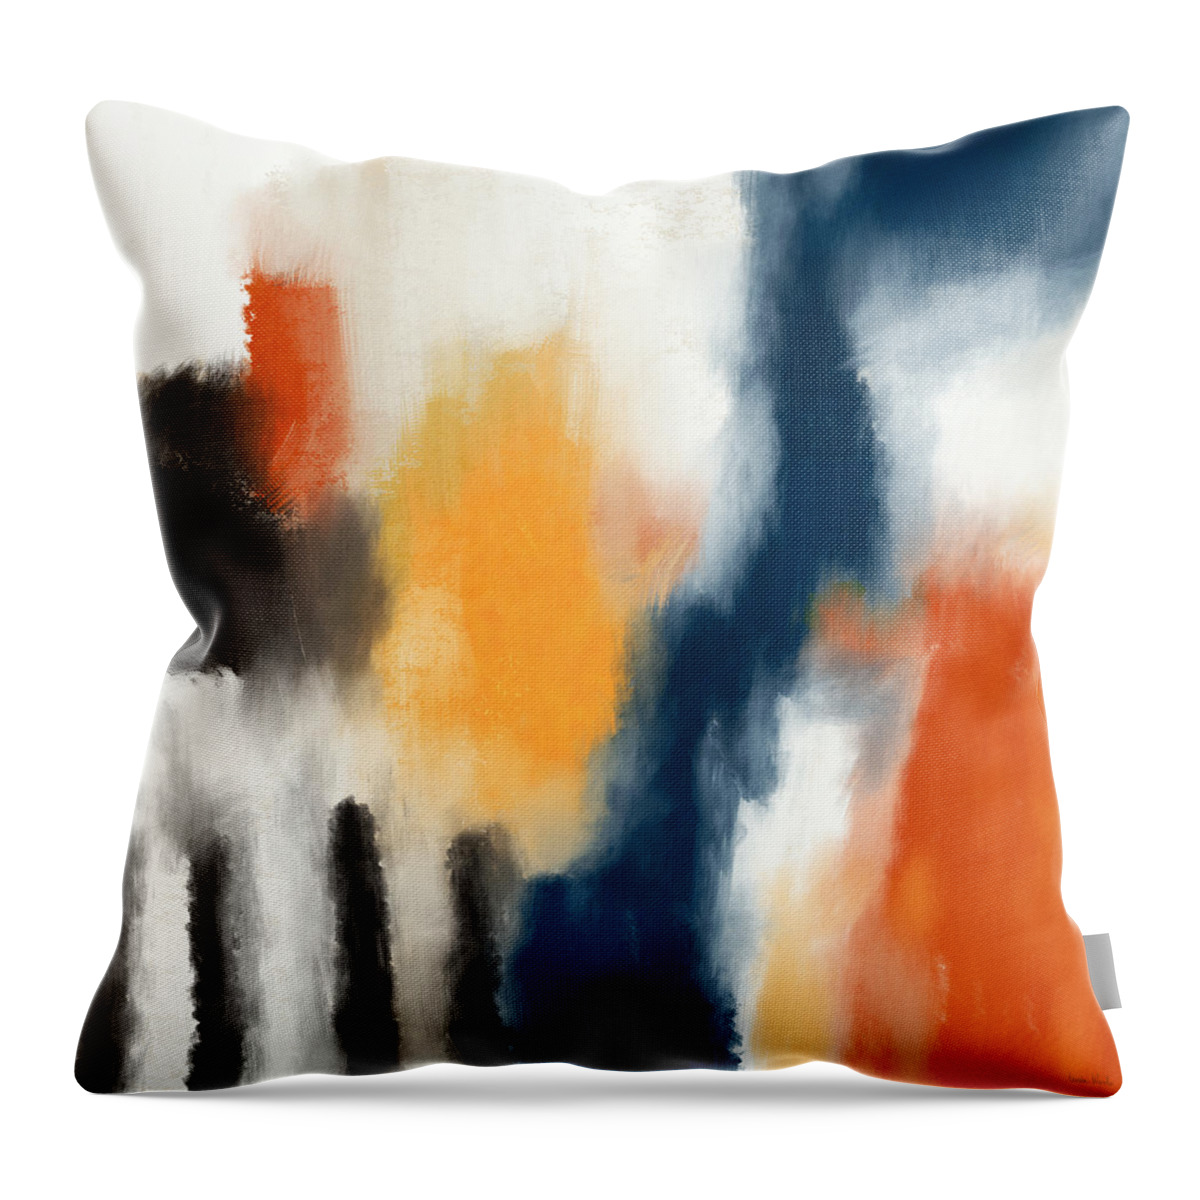 Abstract Throw Pillow featuring the painting Trading Places- Art by Linda Woods by Linda Woods